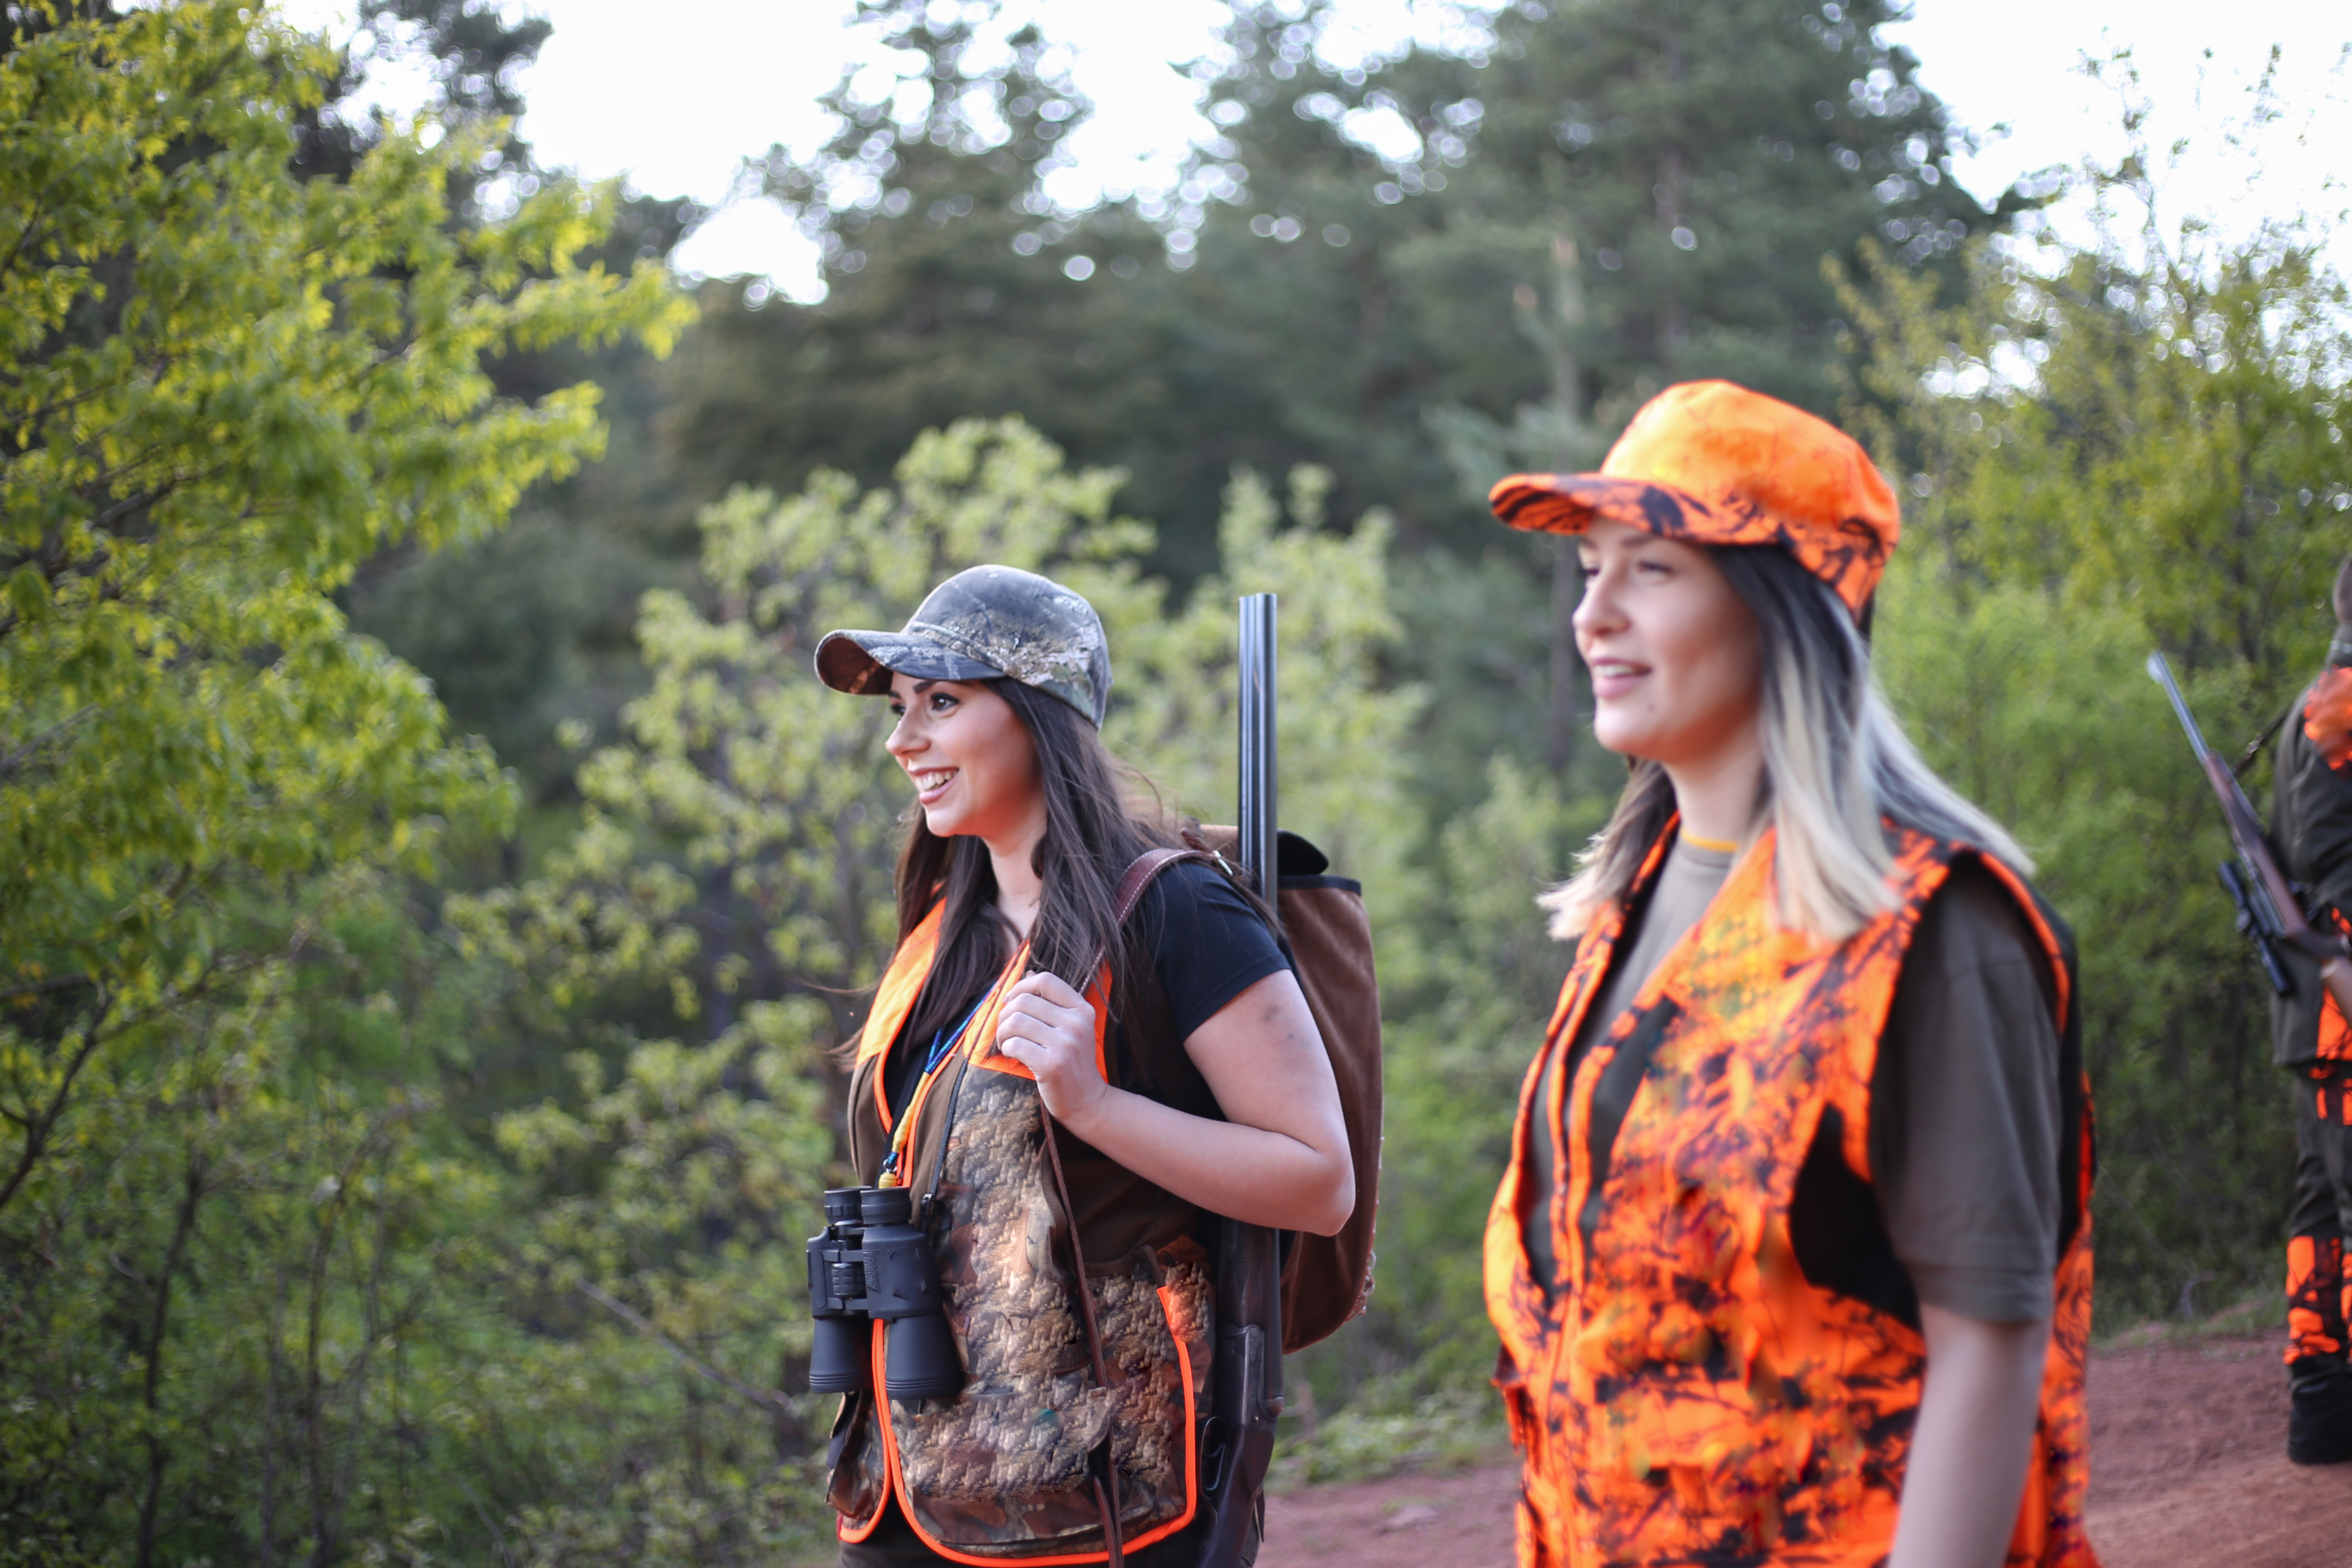 Hunters aiming to birds, hunting in woods.